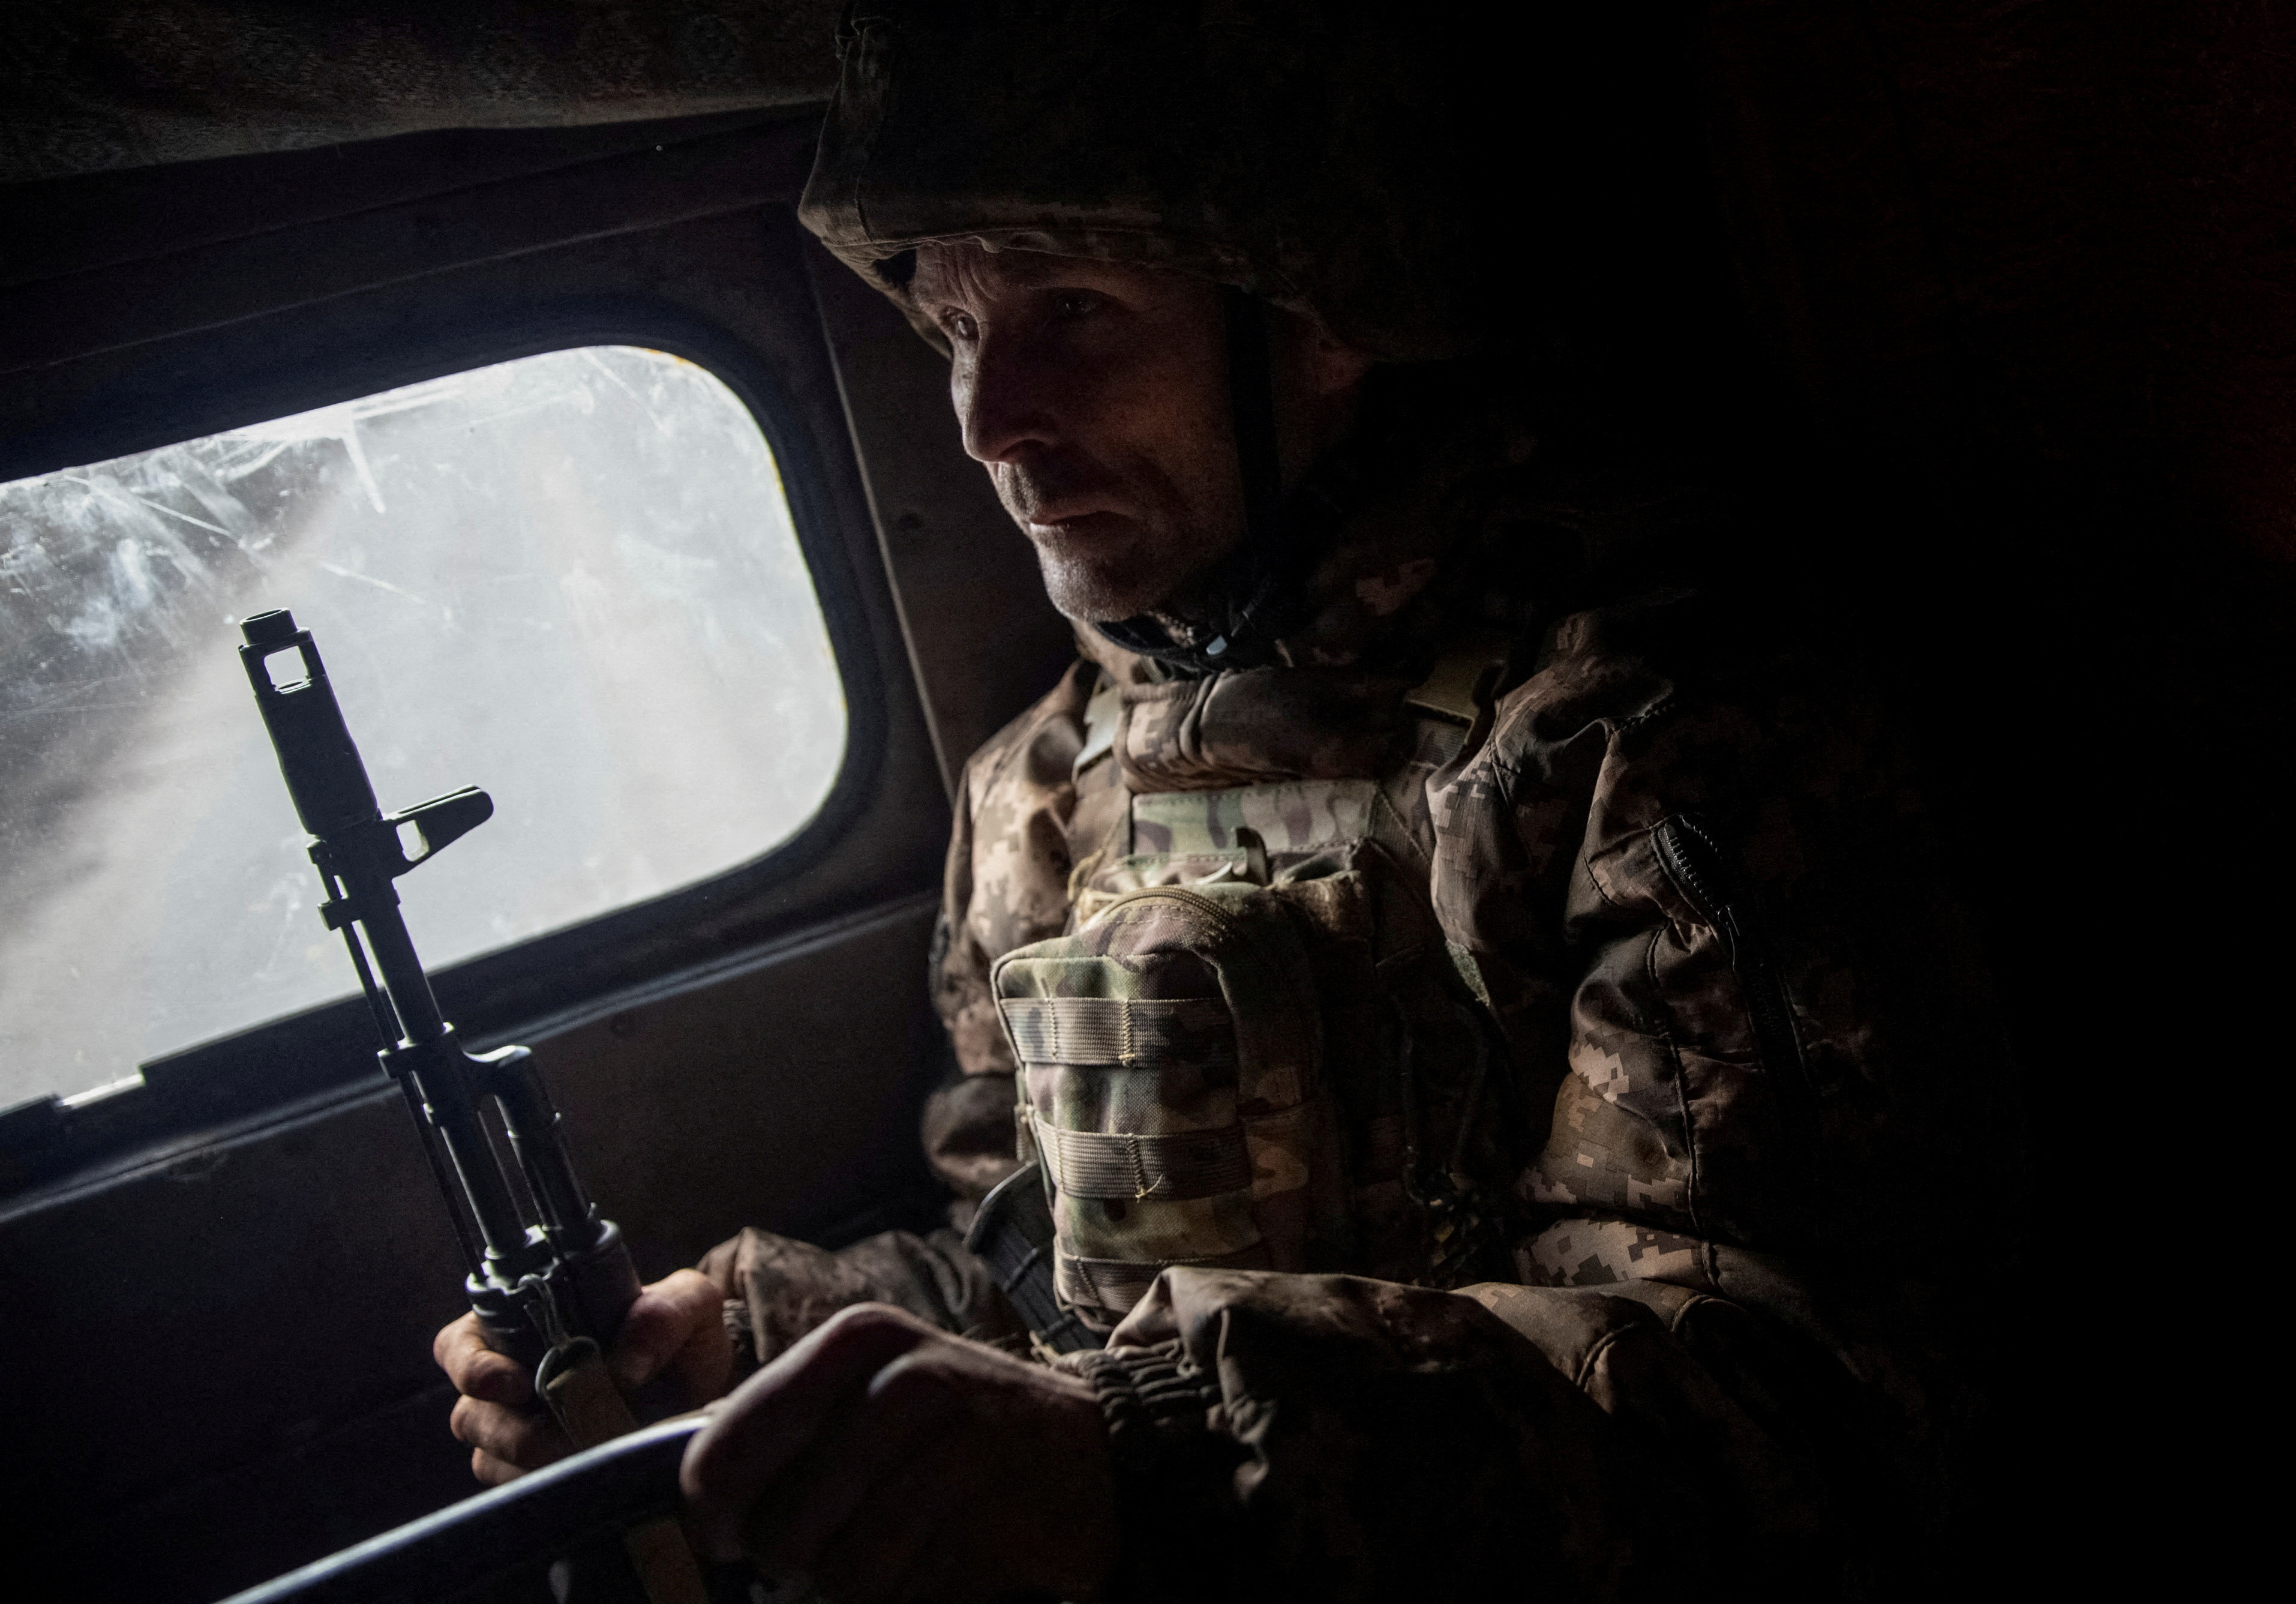 A Ukrainian service member rides a military vehicle in Bakhmut